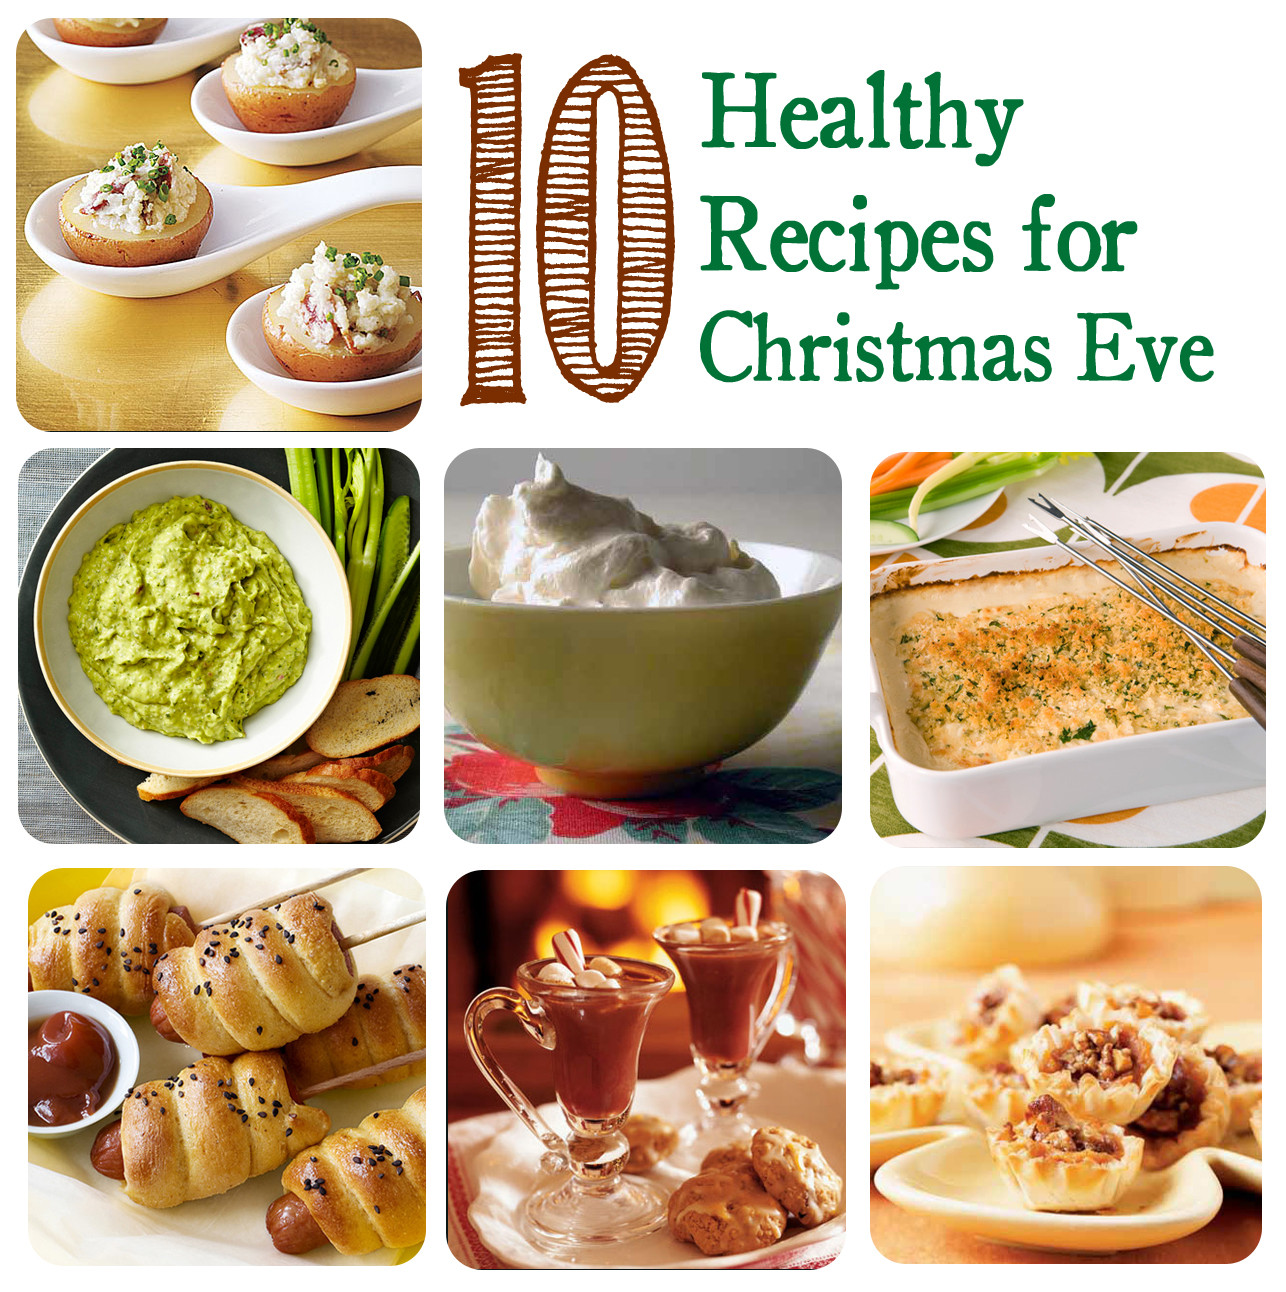 Easy Christmas Eve Appetizers
 My Inspired Home Christmas Eve Healthy Appetizers